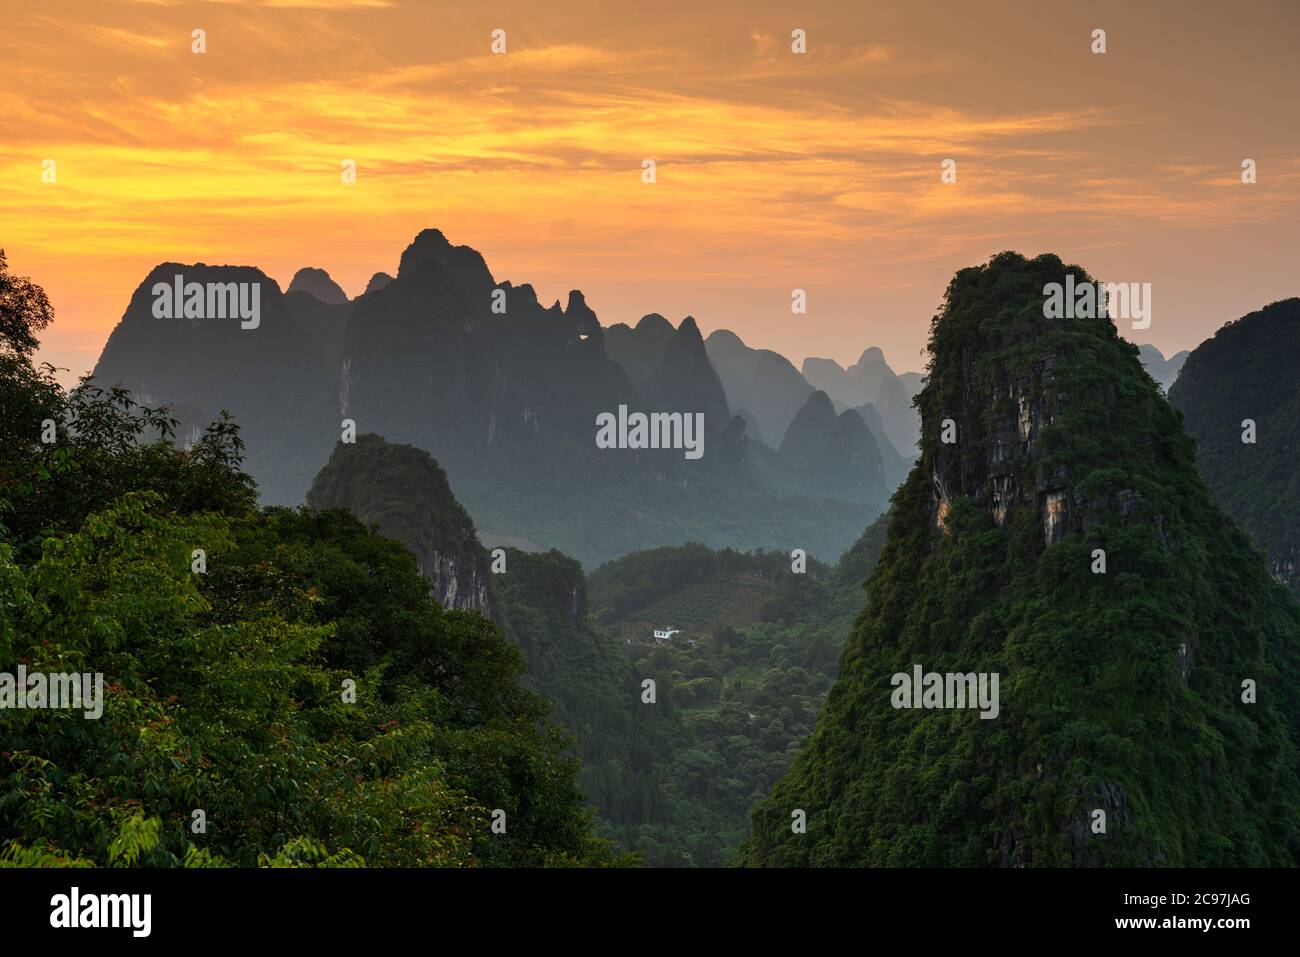 Karst mountain landscape on the Li River in Xingping, Guangxi Province, China. Stock Photo